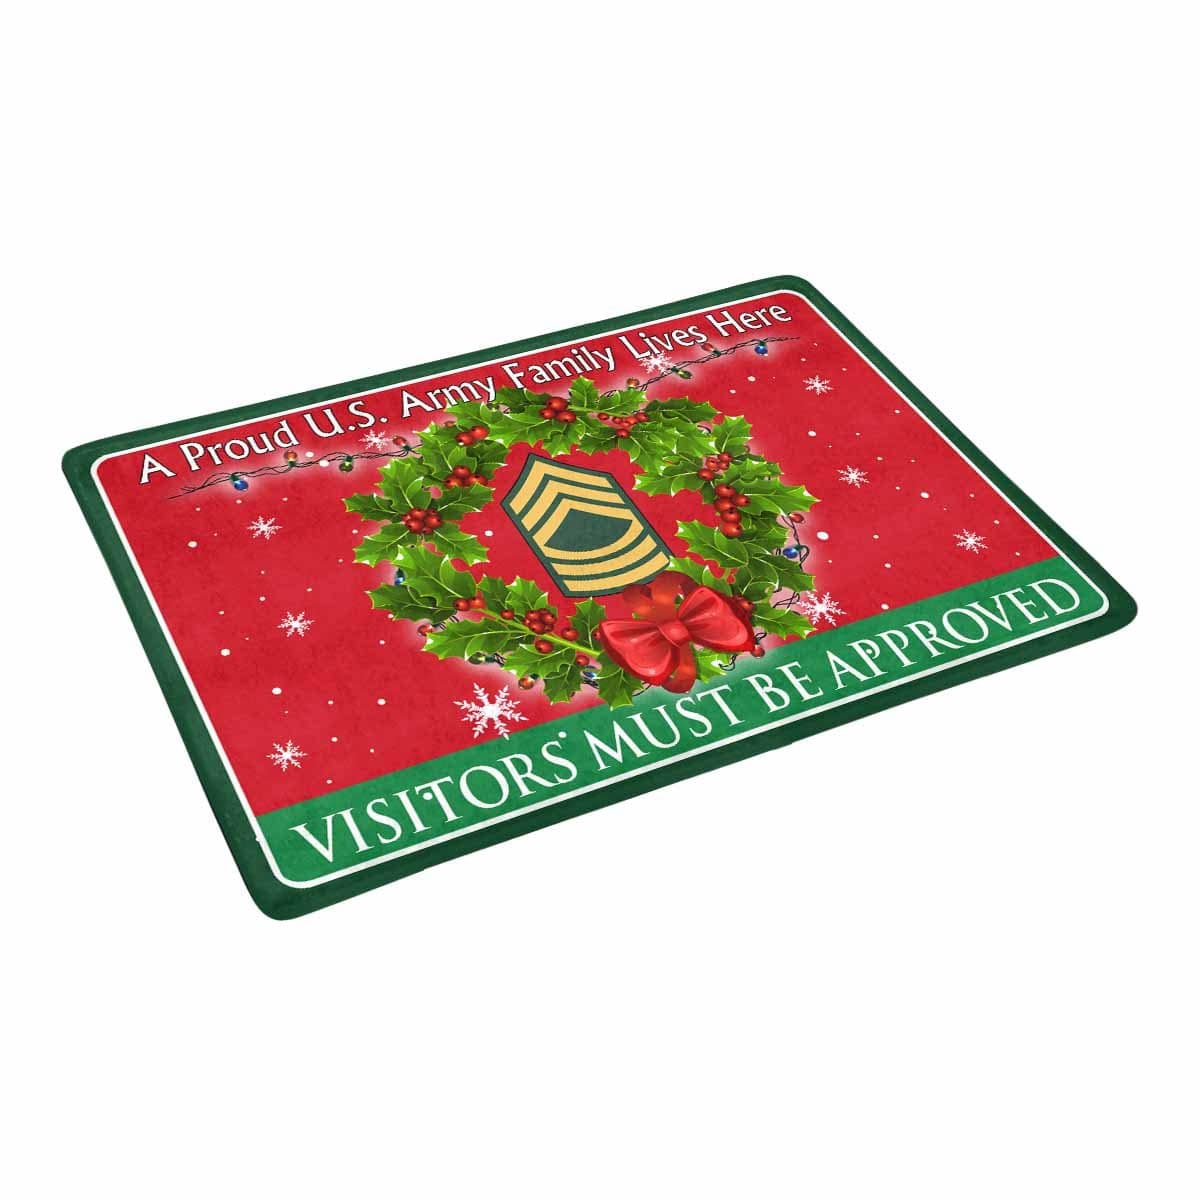 US Army E-8 Master Sergeant E8 MSG Noncommissioned Officer Ranks - Visitors must be approved Christmas Doormat-Doormat-Army-Ranks-Veterans Nation